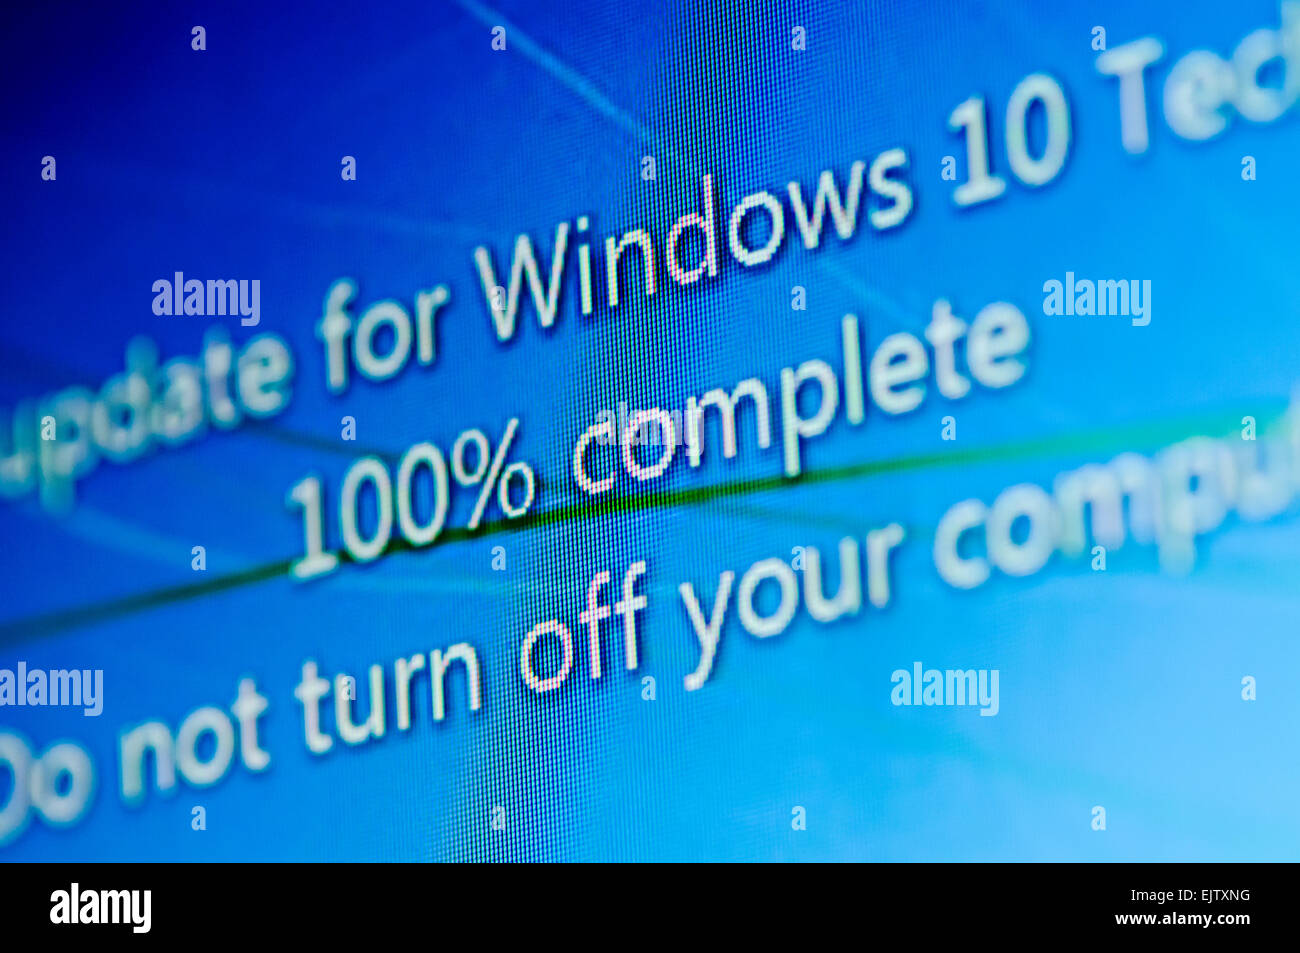 Installing Windows 10 Technical Preview, a public beta release. Stock Photo